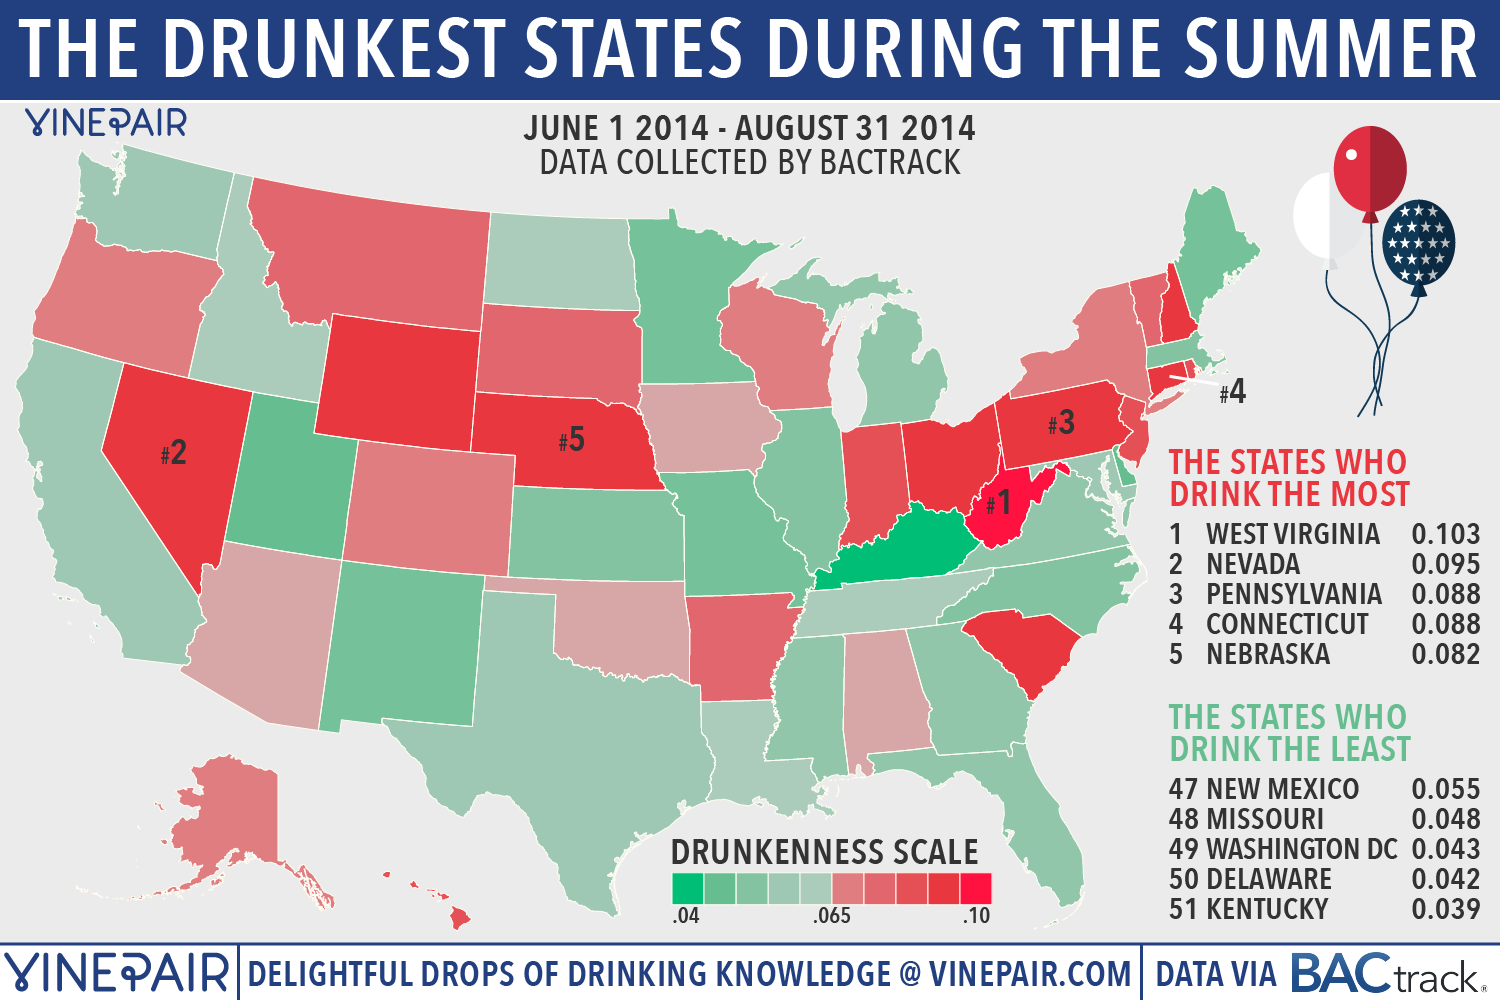 A Map Of The Drunkest States In America During The Summer VinePair